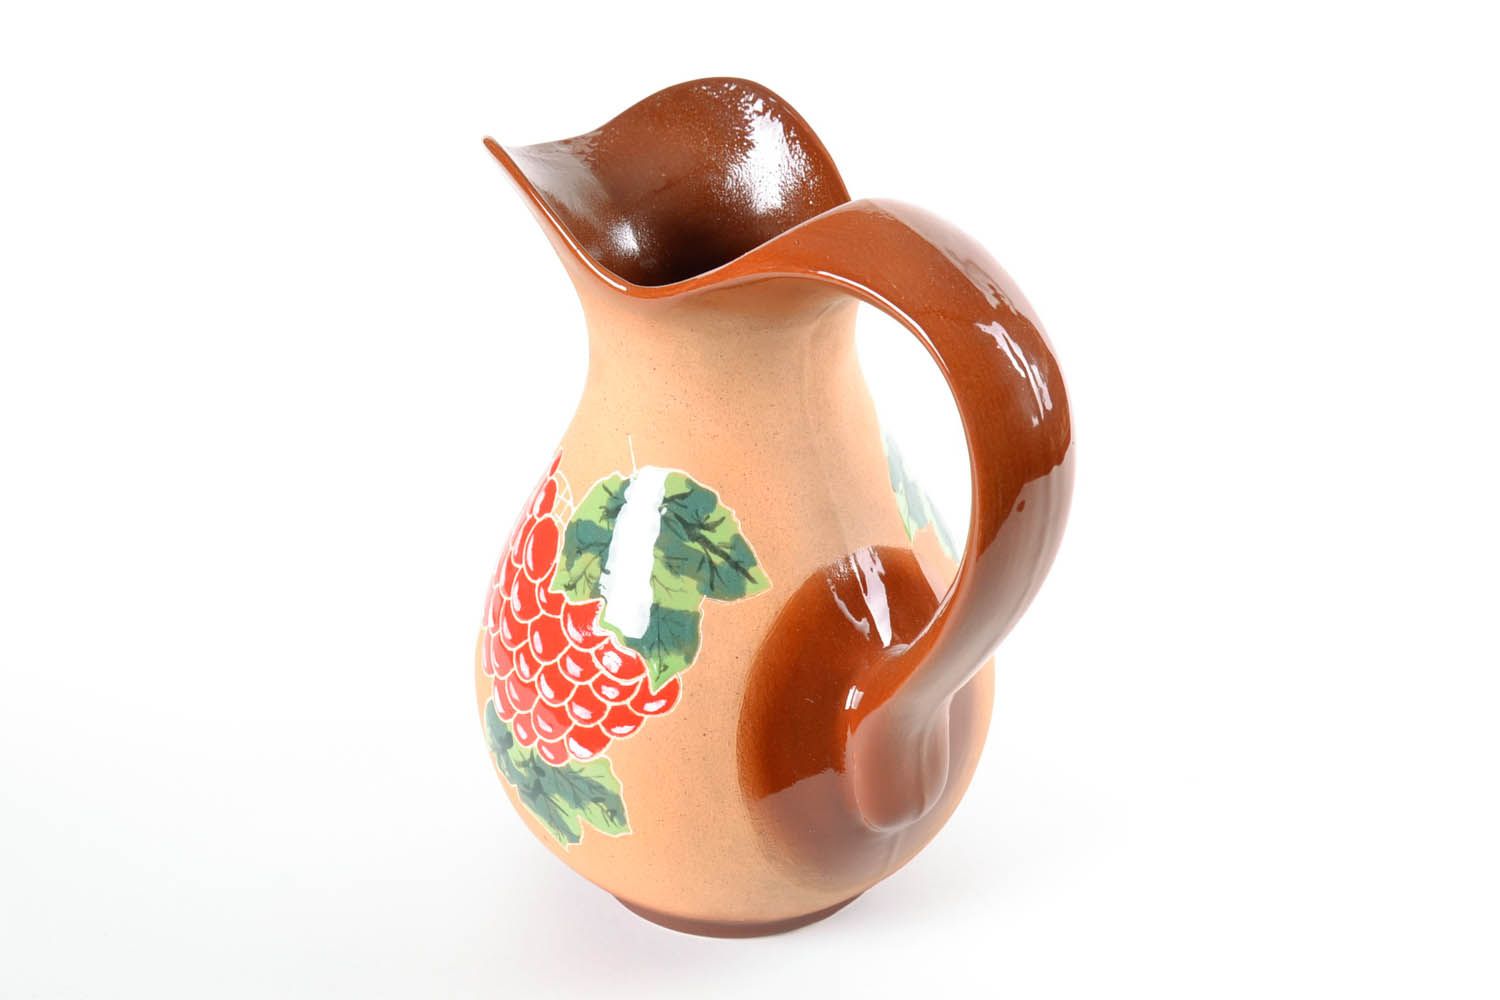 Large 100 oz ceramic wine pitcher with handle and grape pattern in brown color 4 lb photo 4